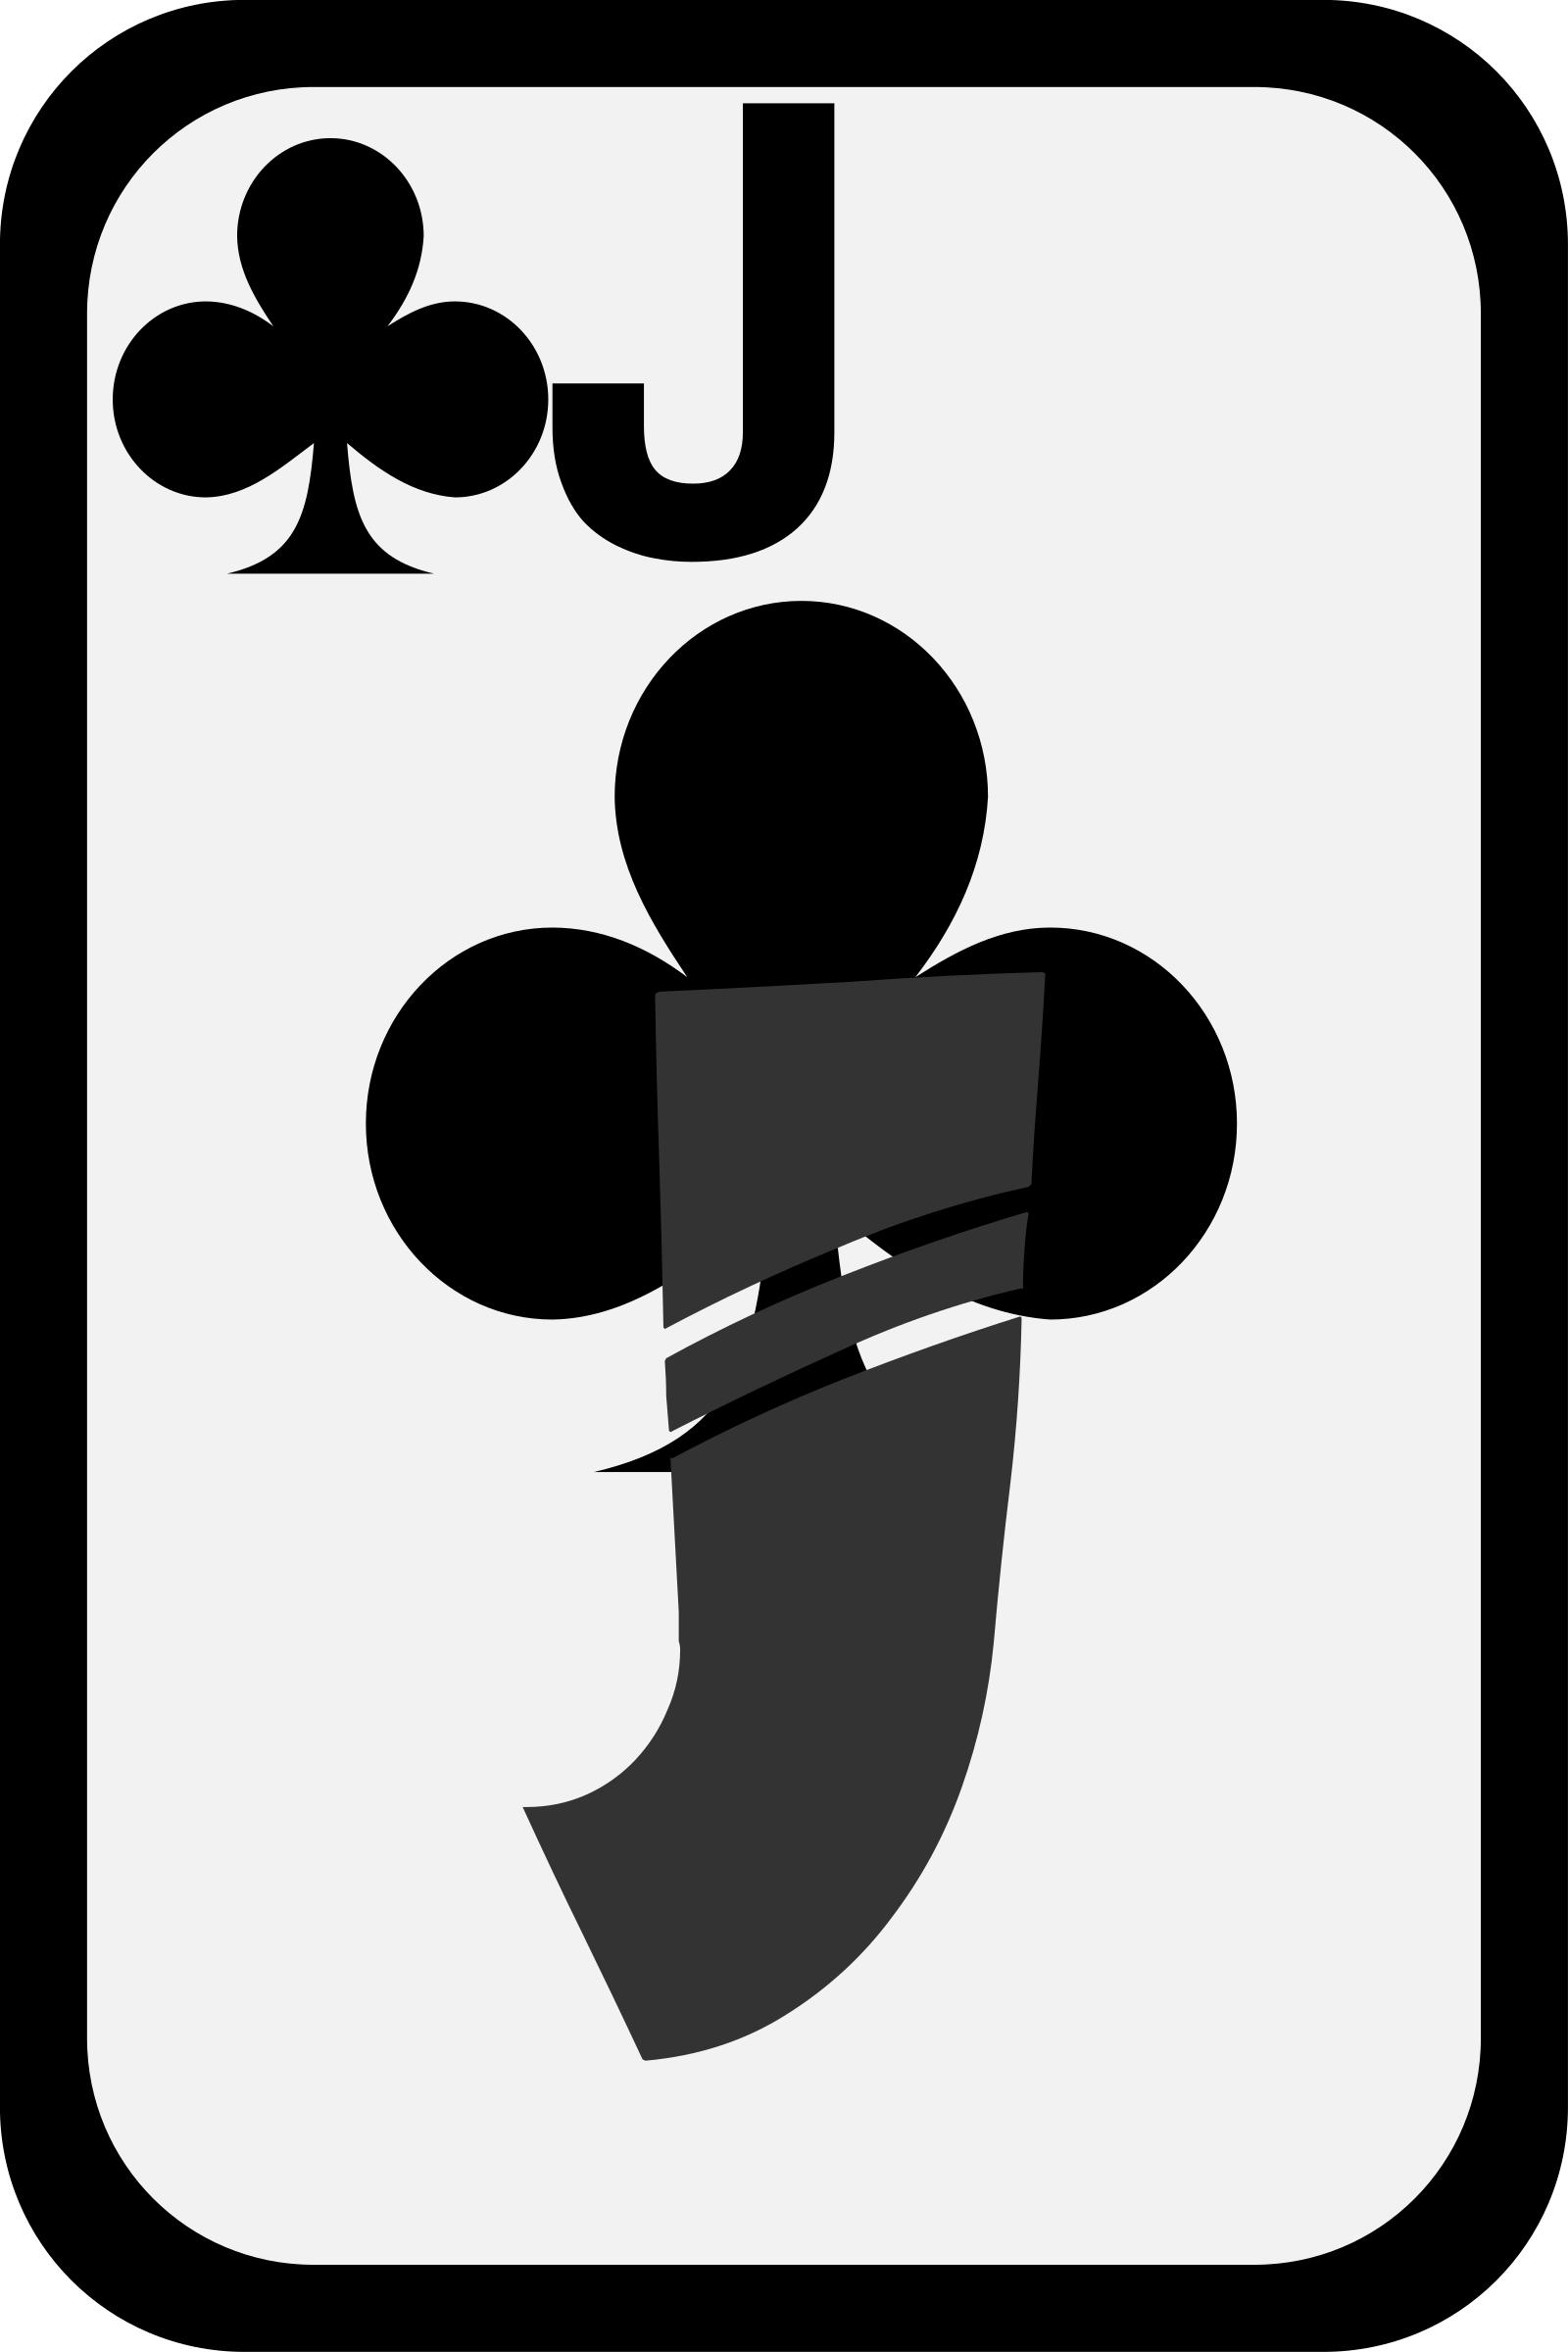 Jack of Clubs png